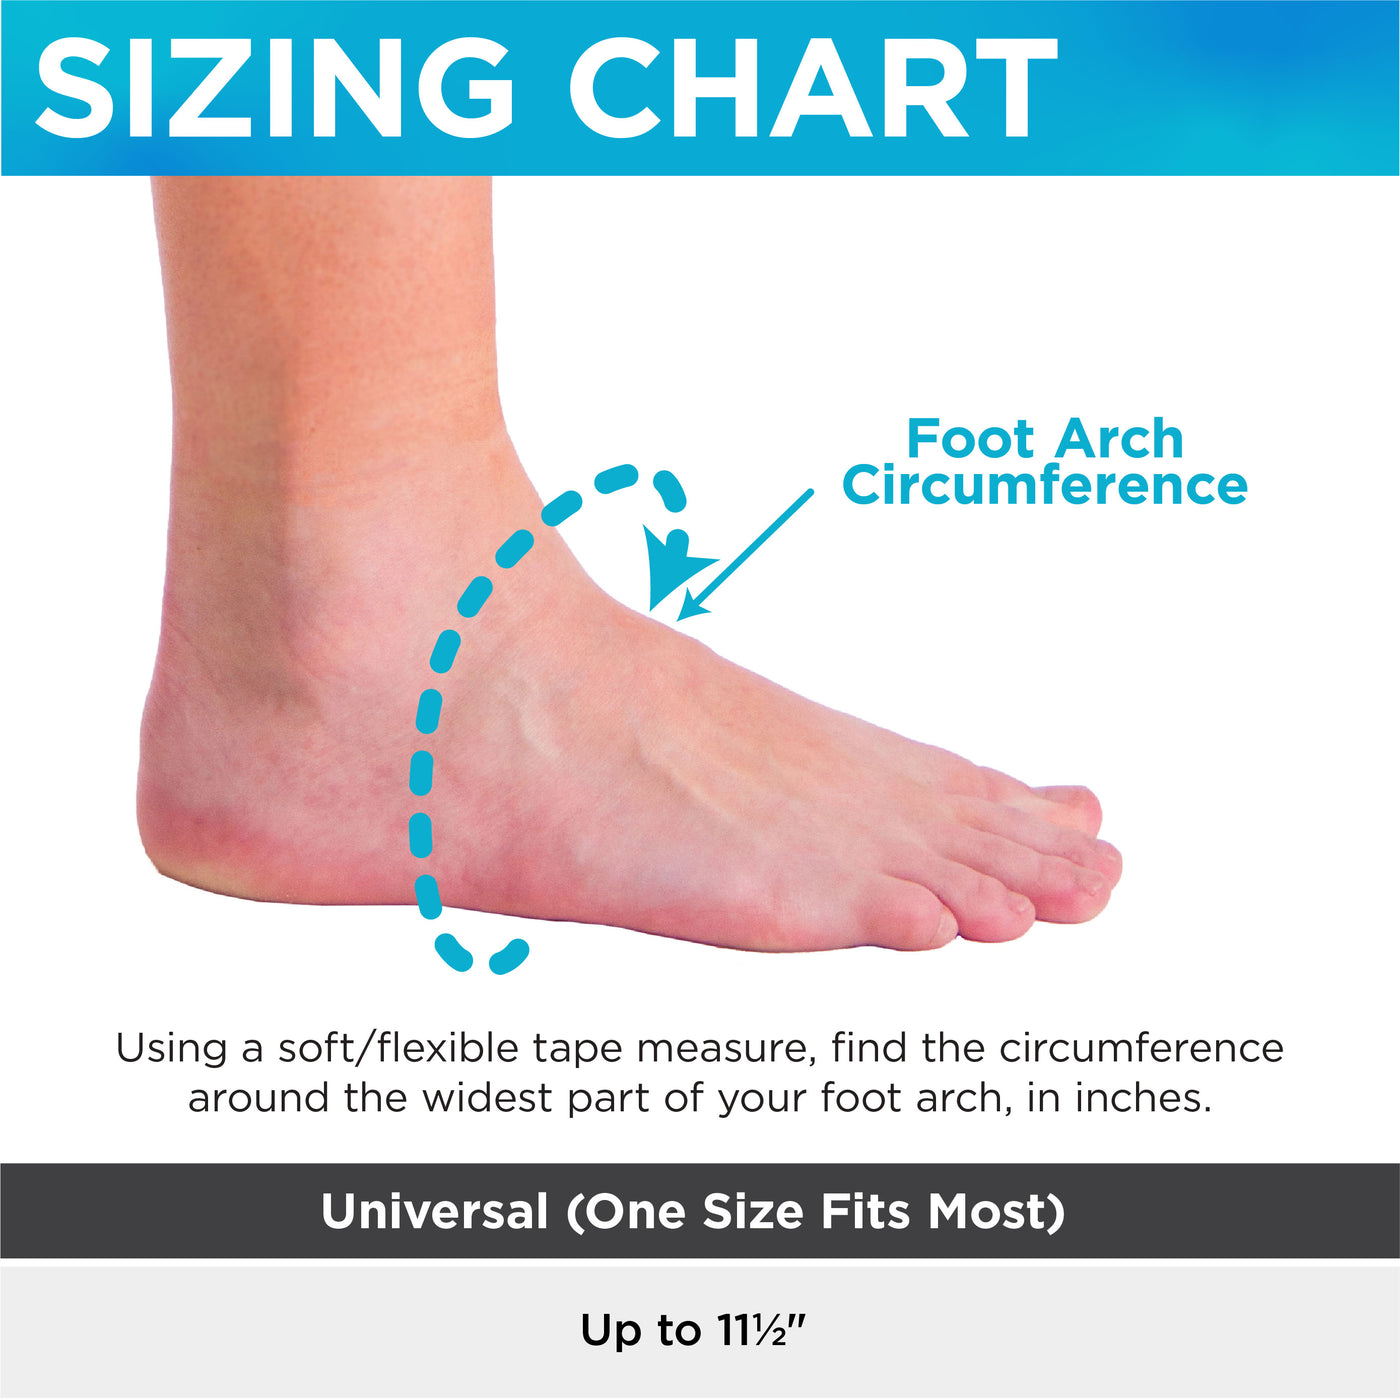 Foot arch brace sizing chart is one size fits most up to an eleven and a half inch arch circumference